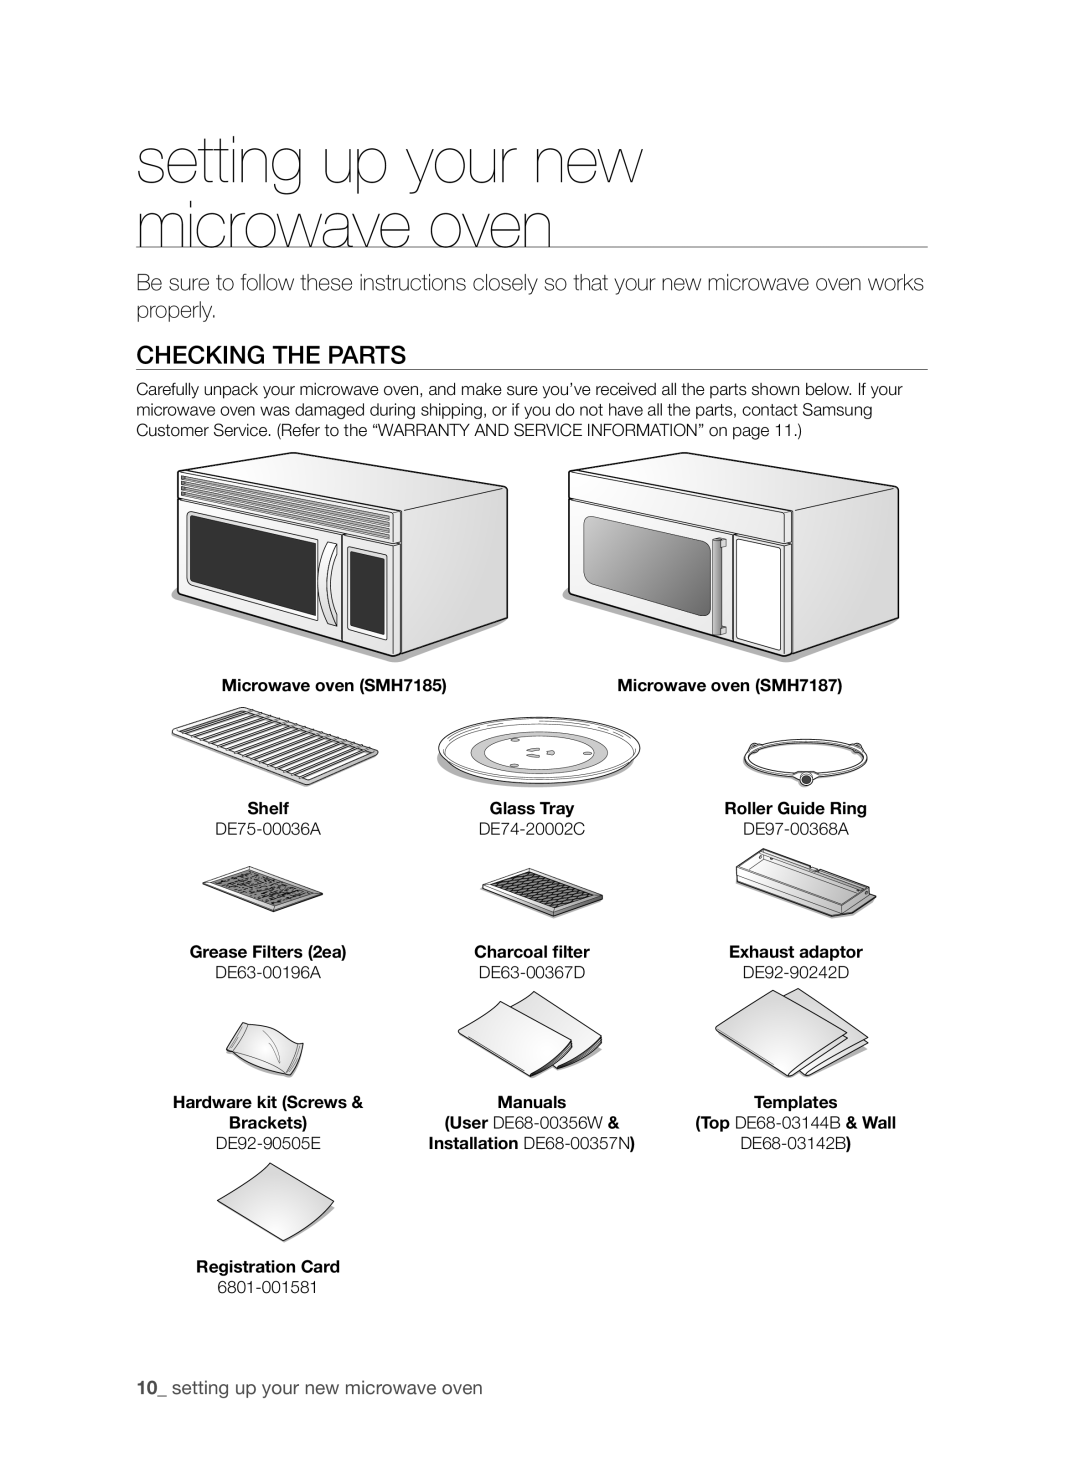 Samsung SMH7185 user manual setting up your new microwave oven, Checking the parts 